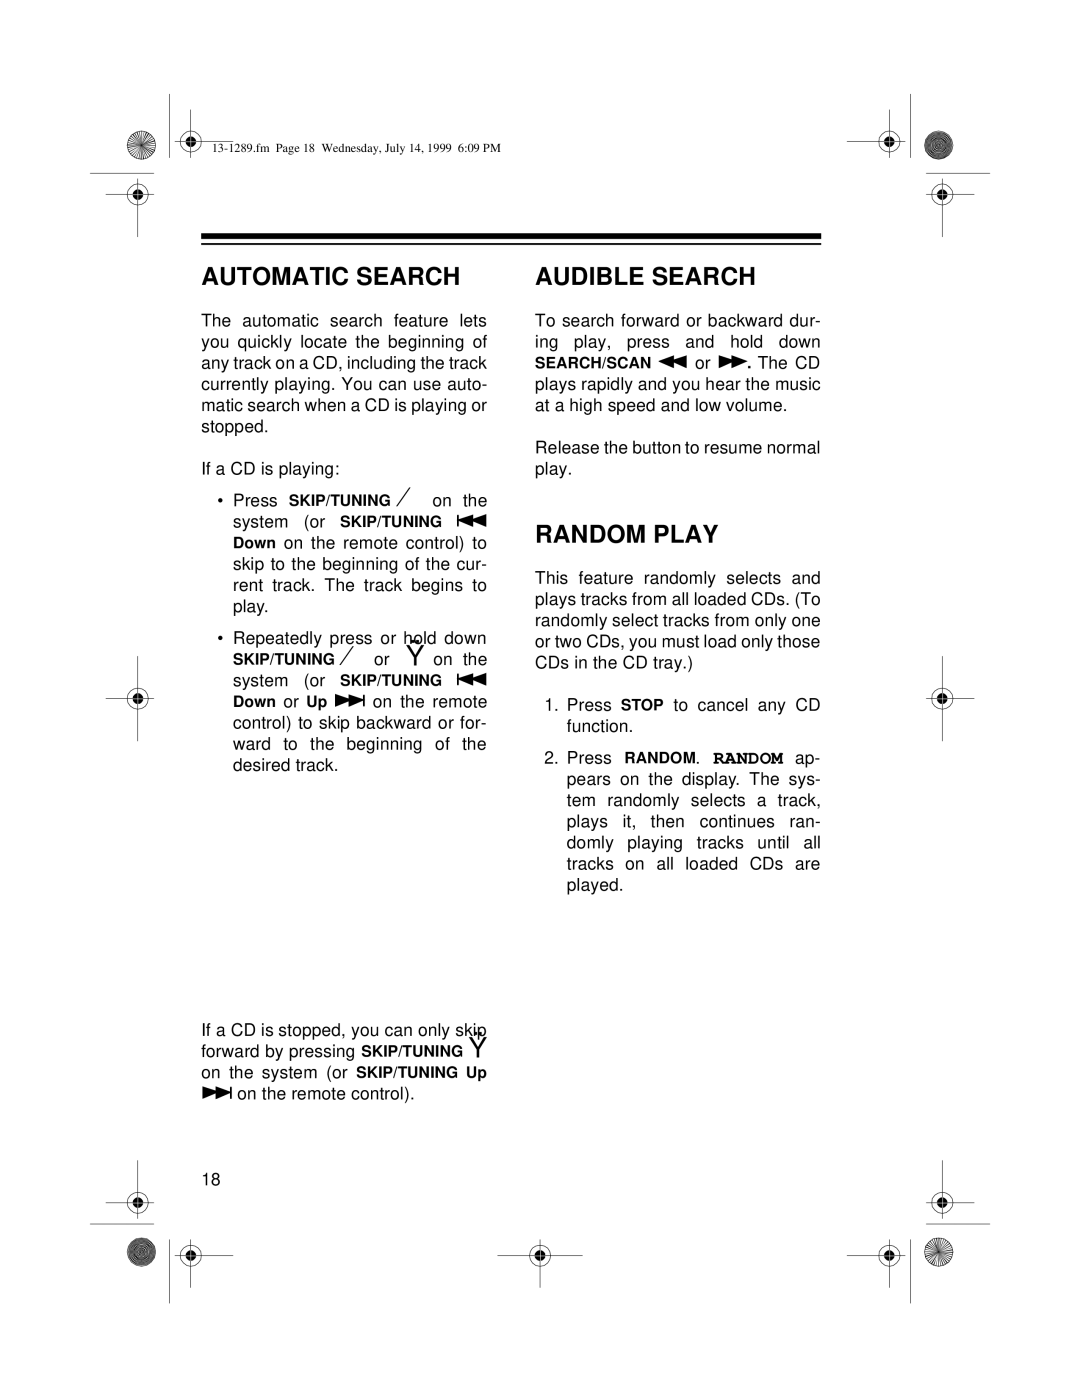 Optimus 742 owner manual Automatic Search, Audible Search, Random Play 